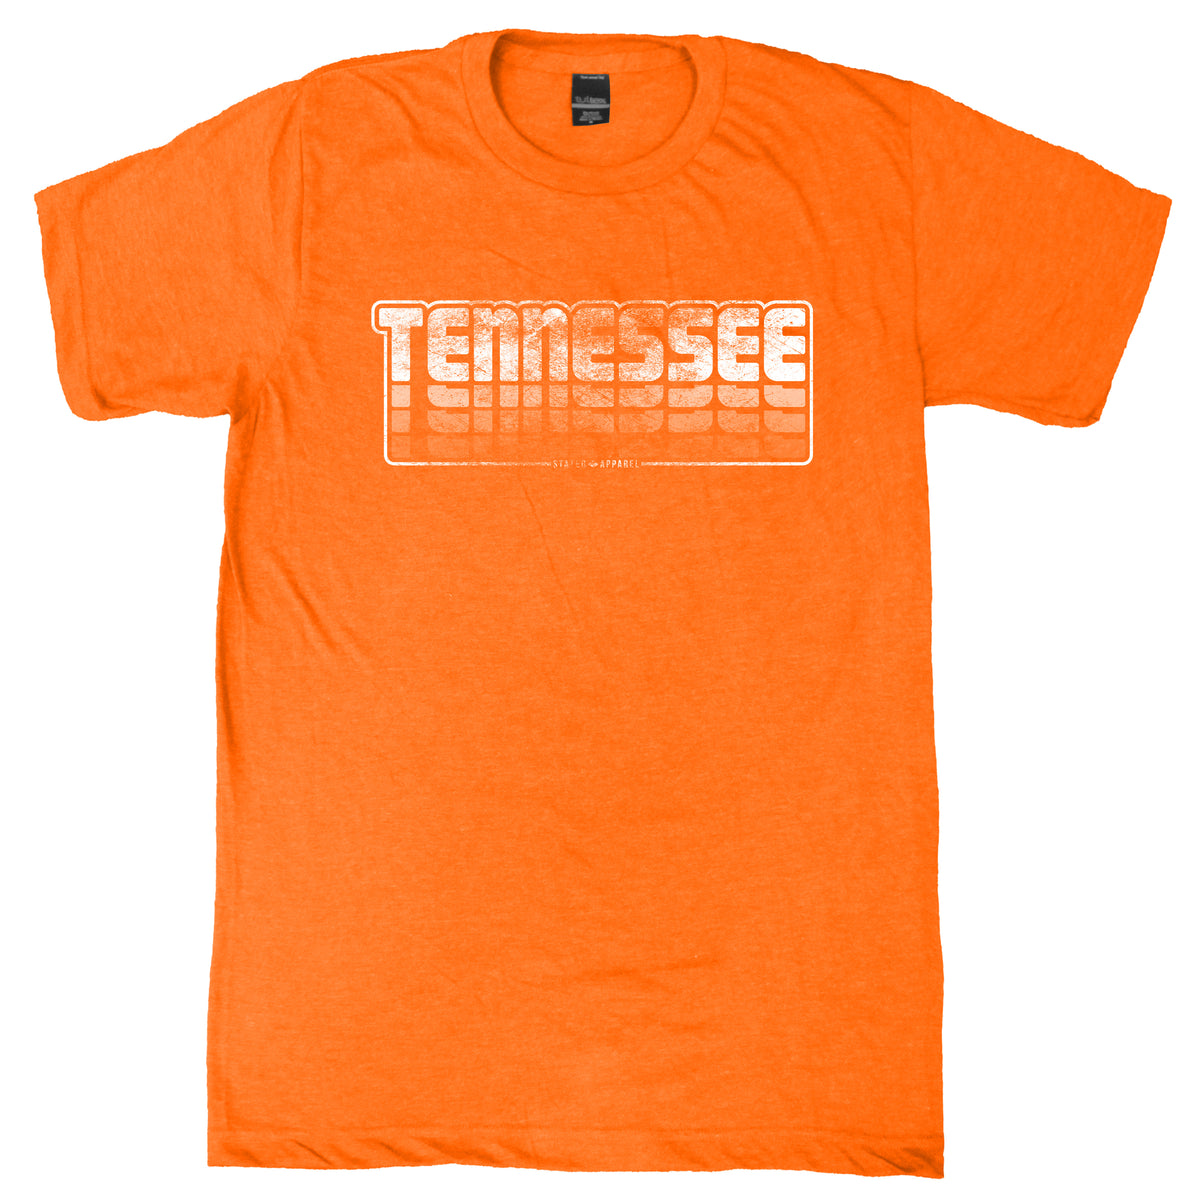 Tennessee Retro Stack Tee